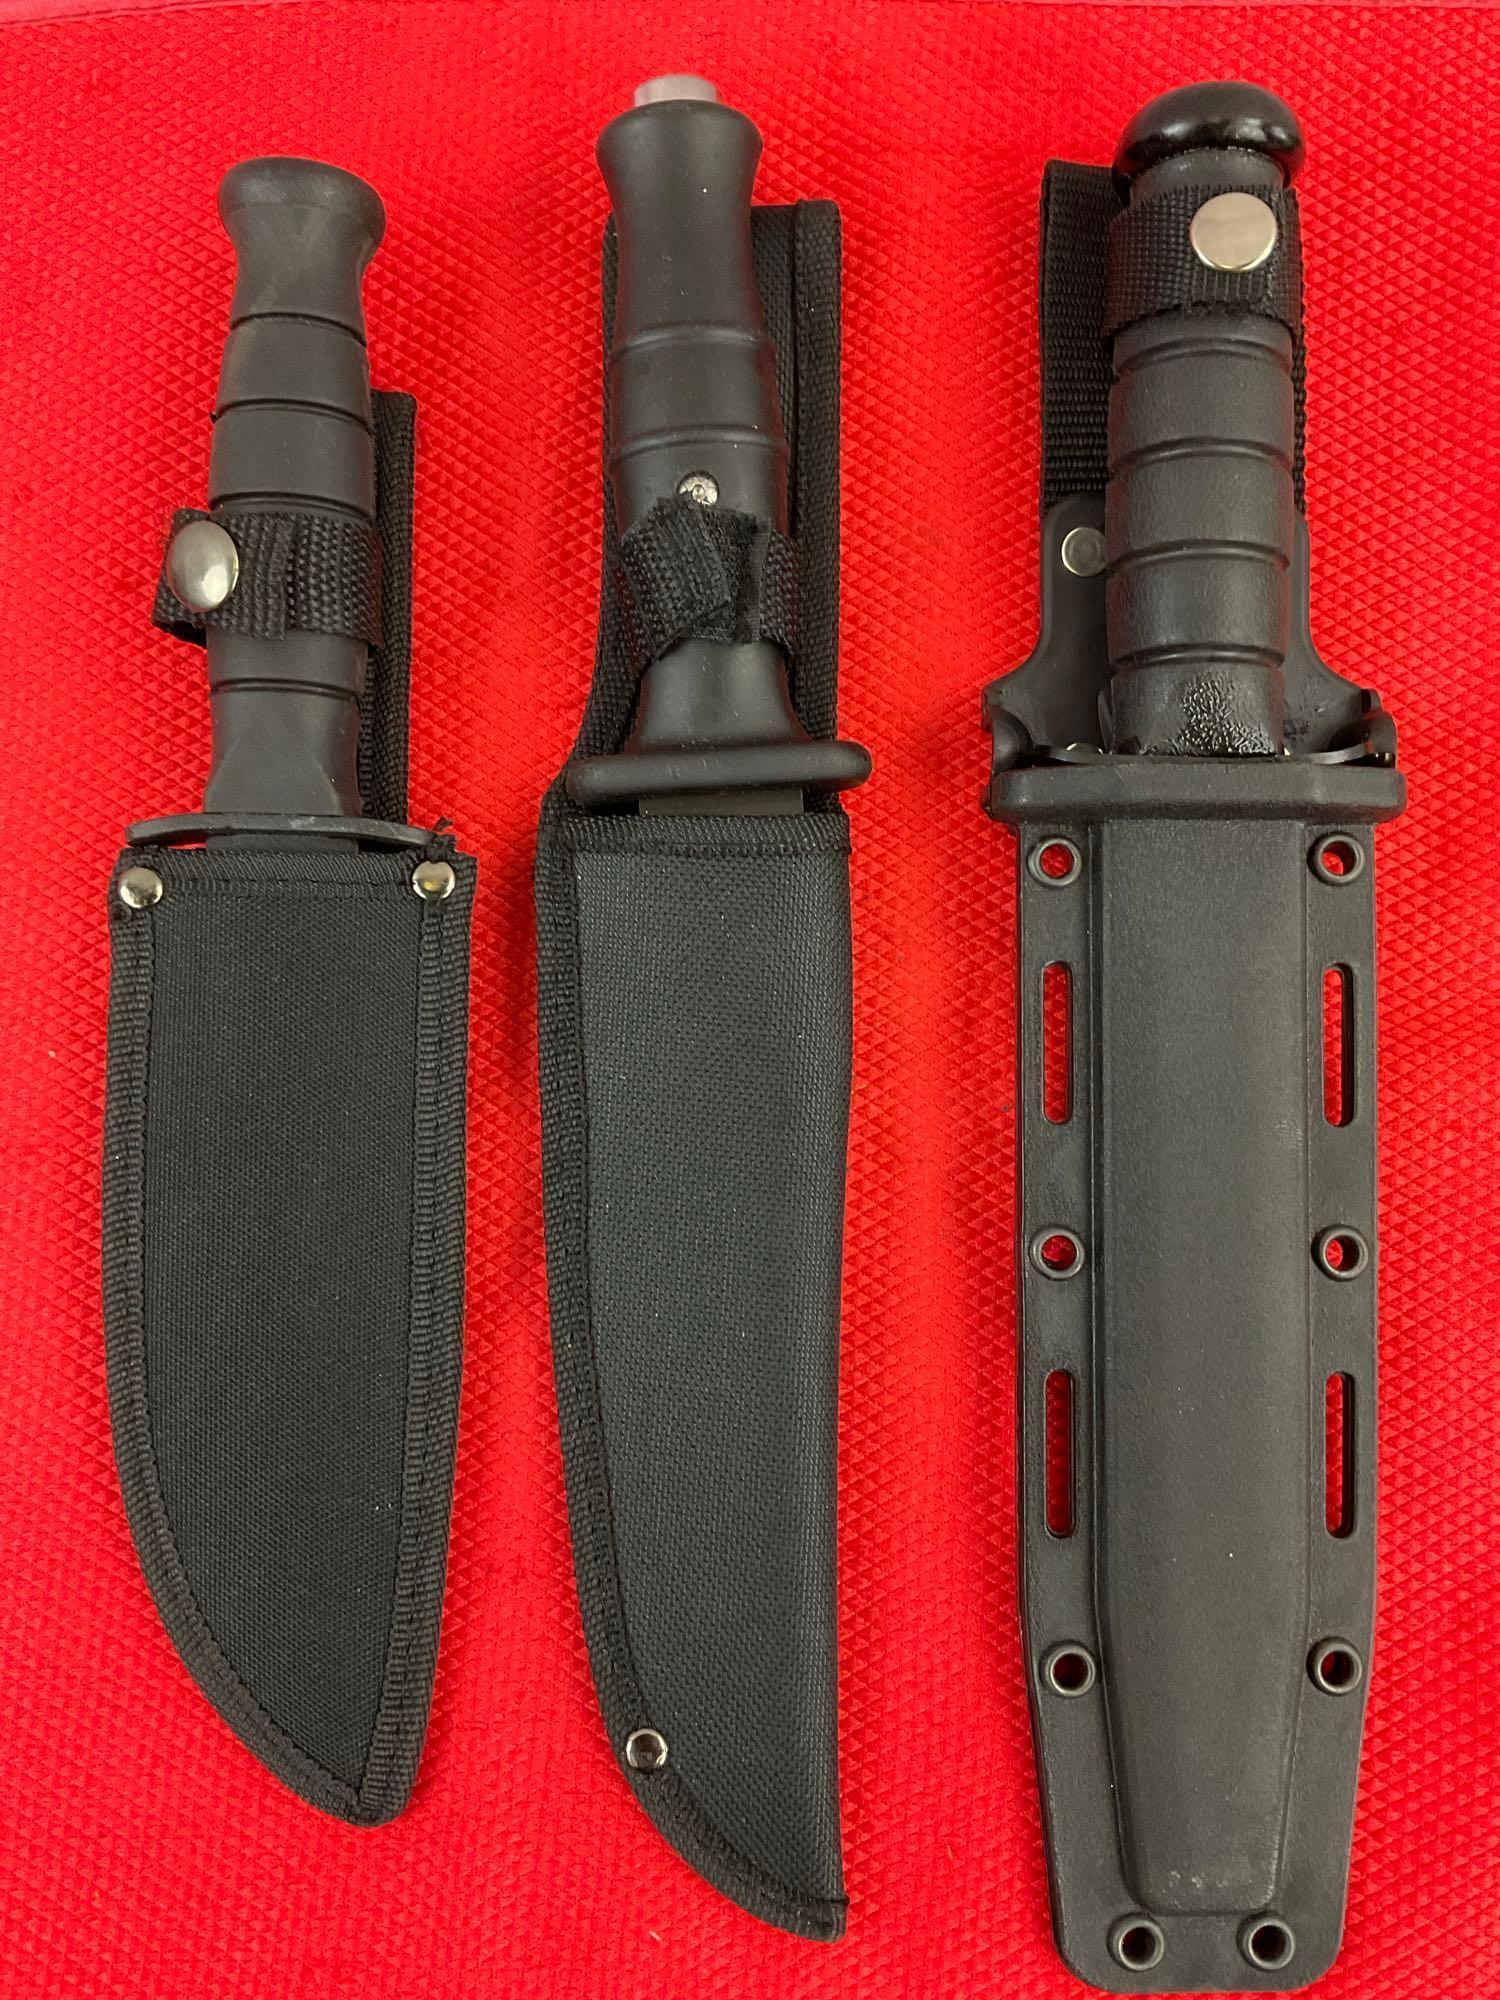 3 pcs Modern Steel Fixed Blade Tactical Knives w/ Sheathes. 1x Survivor, 1x D.O.T.T., 1x Unknown.